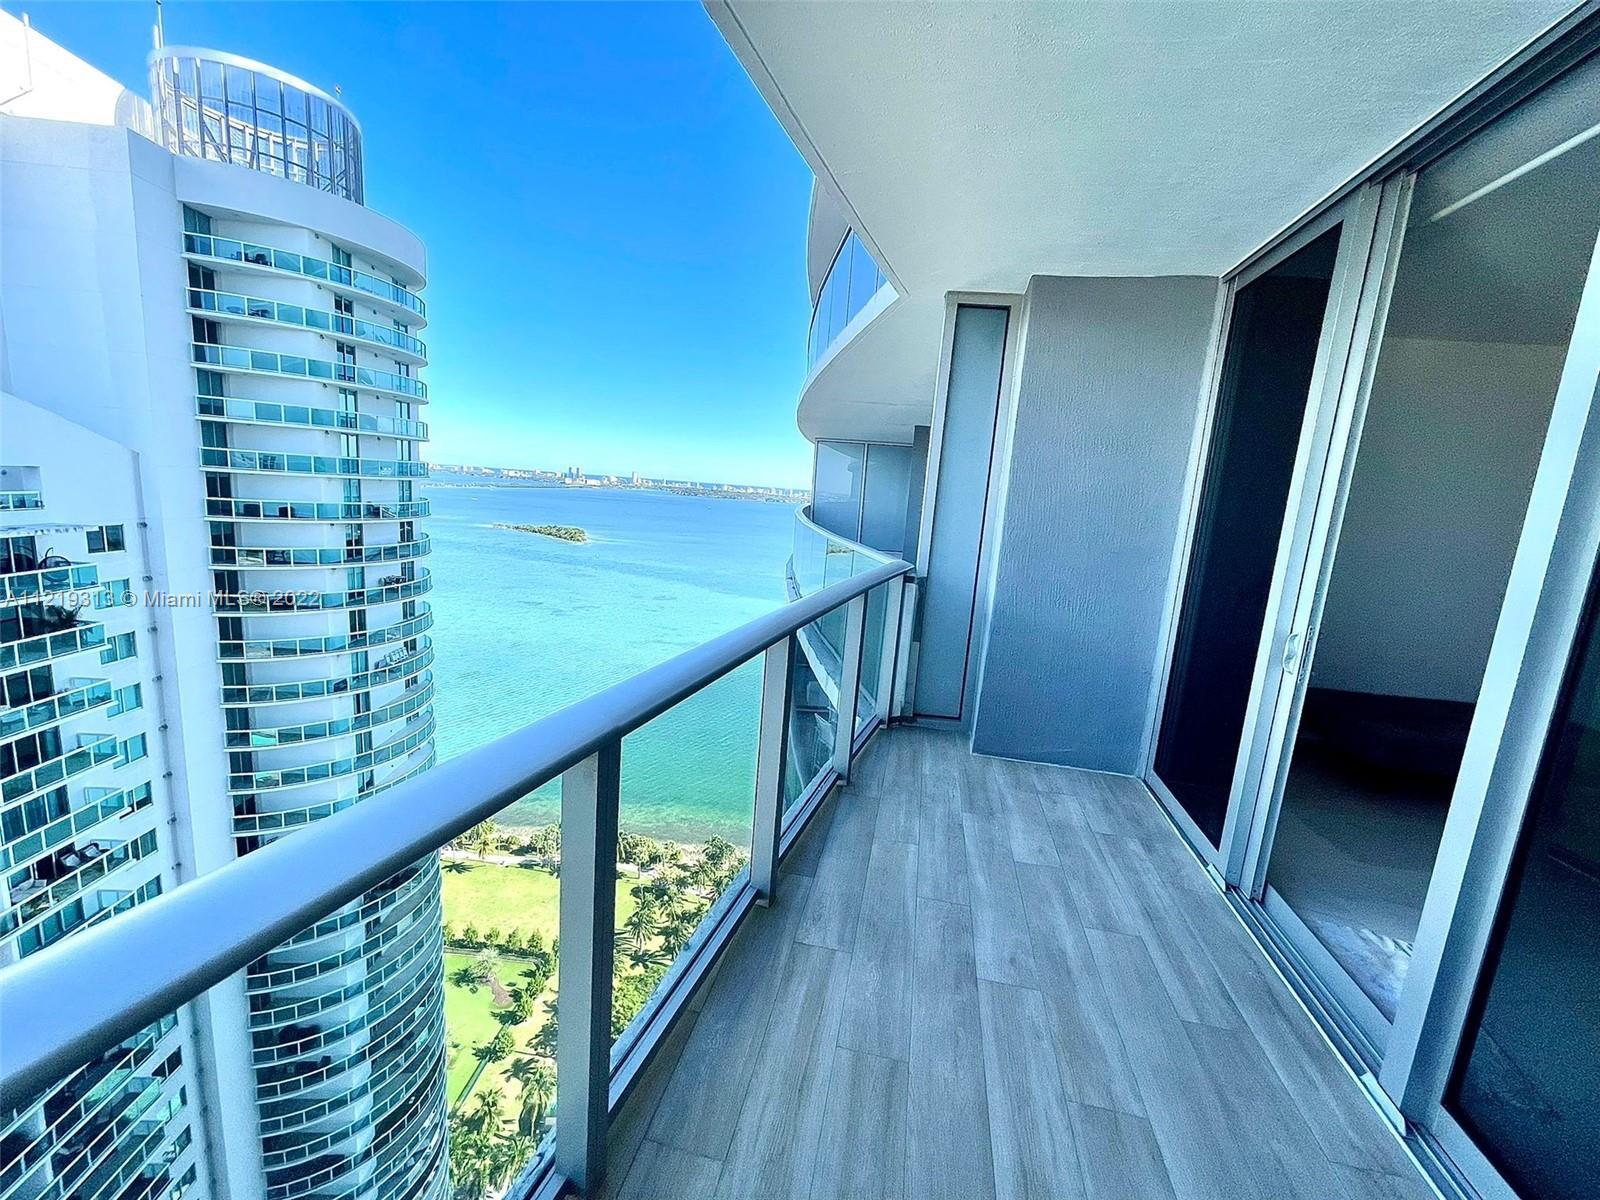 Luxurious Brand New Condo with Spacious 1 Bedroom + 1 Den / 2 Full Bath, a large balcony overlooking